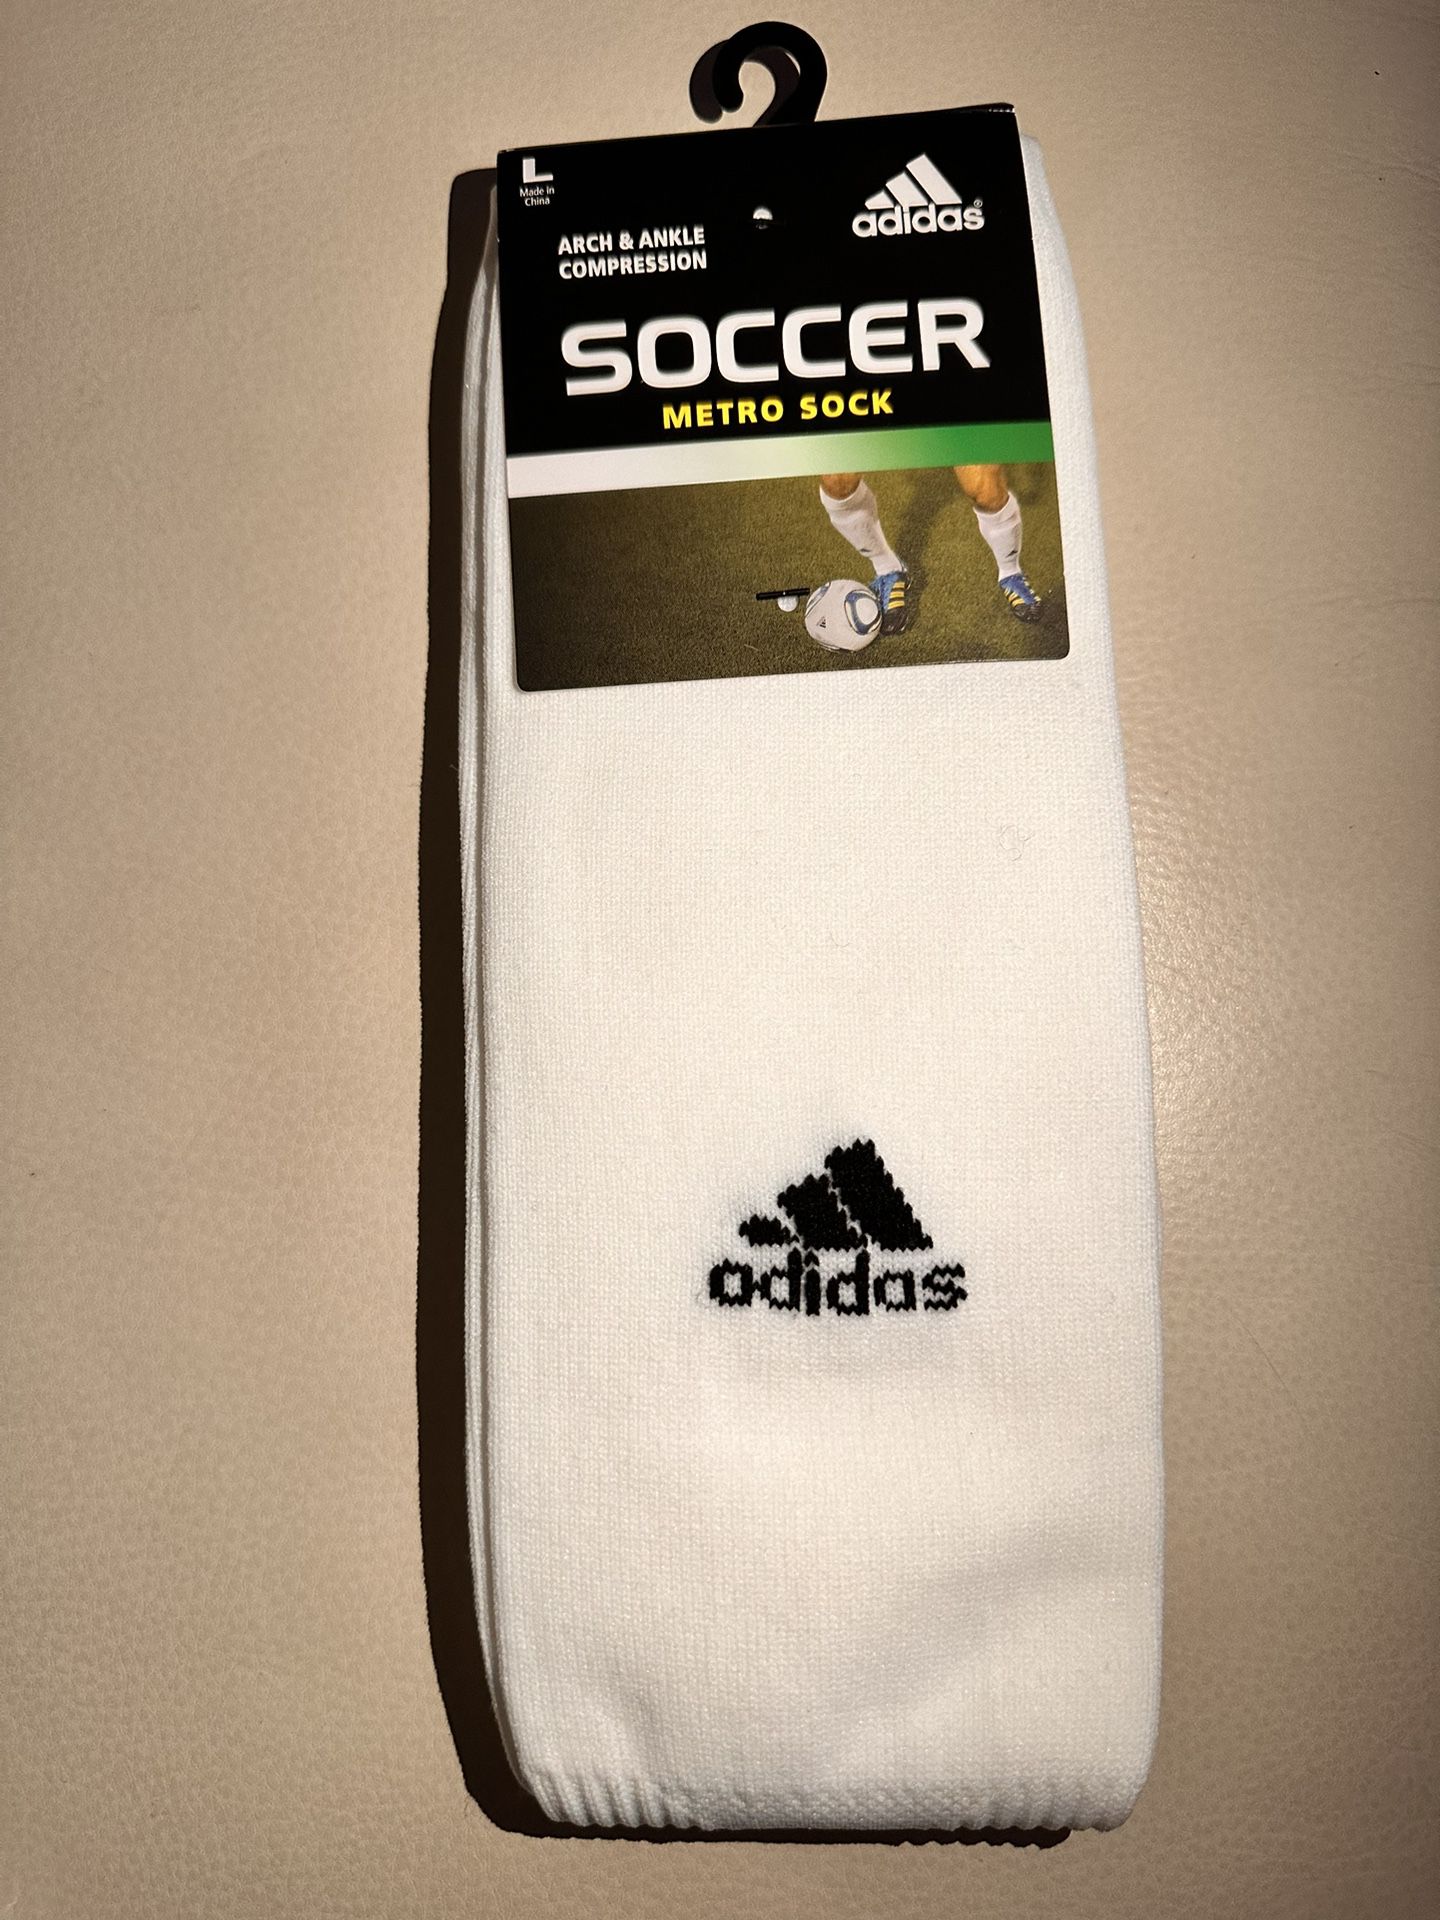 ADIDAS UNISEX- ADULT METRO SOCK Socks (1 PAIR SIZE L) SOCCER. ARCH & ANKLE COMPRESSION. BLACK 